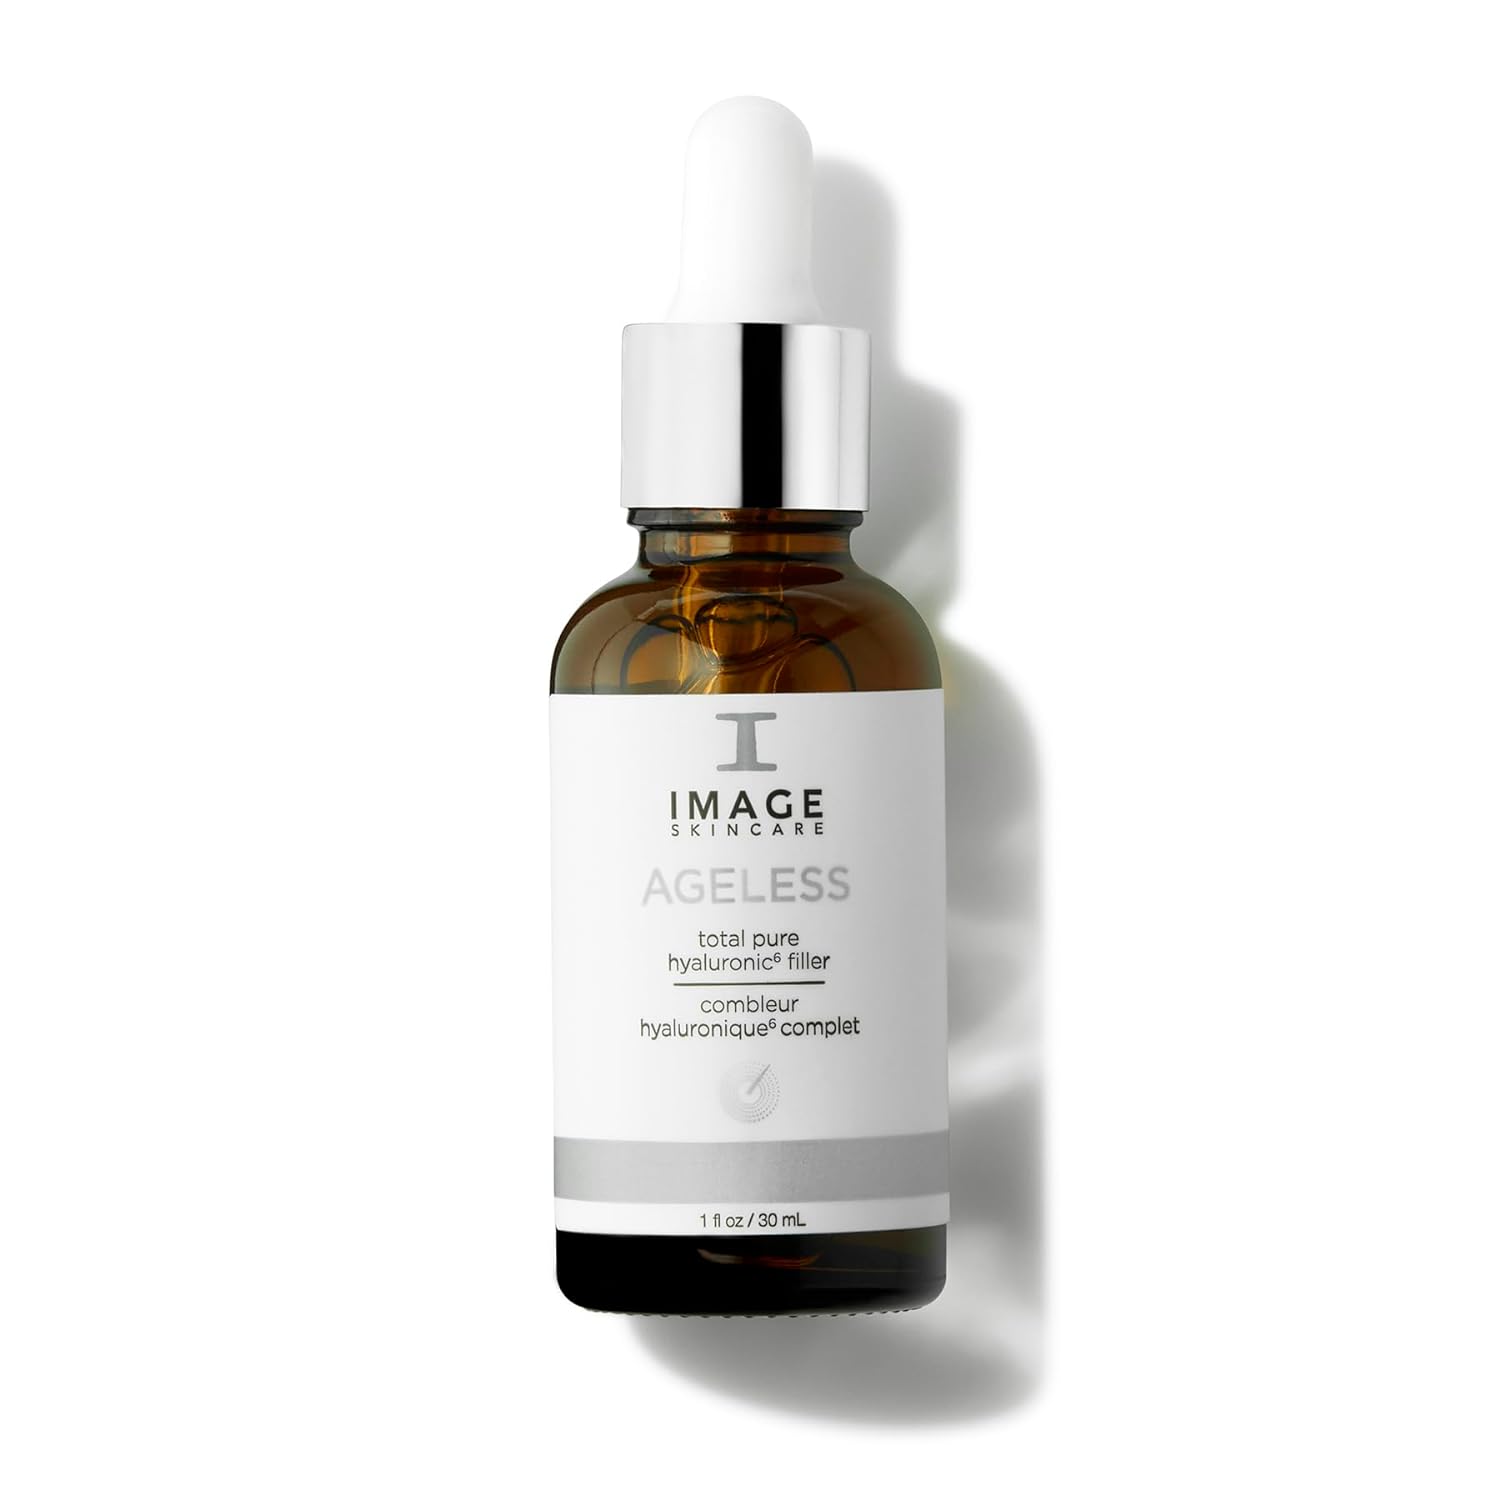 Image AGELESS total pure hyaluronic 6 filler 1oz